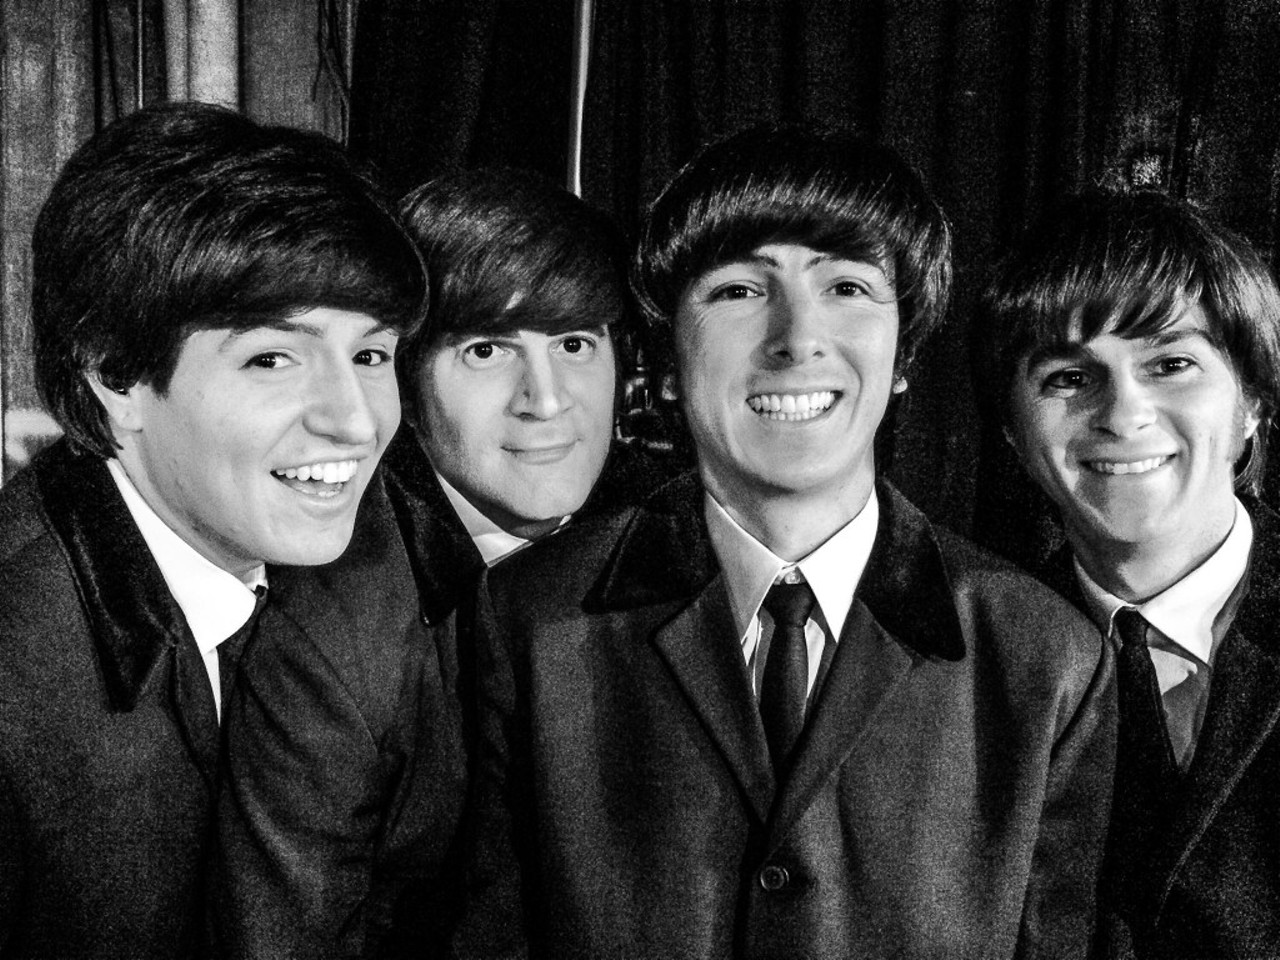 Sunday, May 3: Make it Rain - Given how difficult it was to get tickets to the recent Rock Hall Inductions, chances are good that many Clevelanders didn't gets to see Beatles Paul McCartney and Ringo Starr when they were in town. If you're in need of a Beatles fix, you might want to head to the State Theatre today at 3 and 7 p.m. to see RAIN: A Tribute to the Beatles. It's been called &#147;the next best thing to seeing The Beatles!&#148; The group performs "the full range of The Beatles' discography," including songs the Beatles never performed for an audience. Tickets start at $29. (Niesel, photo via Facebook)